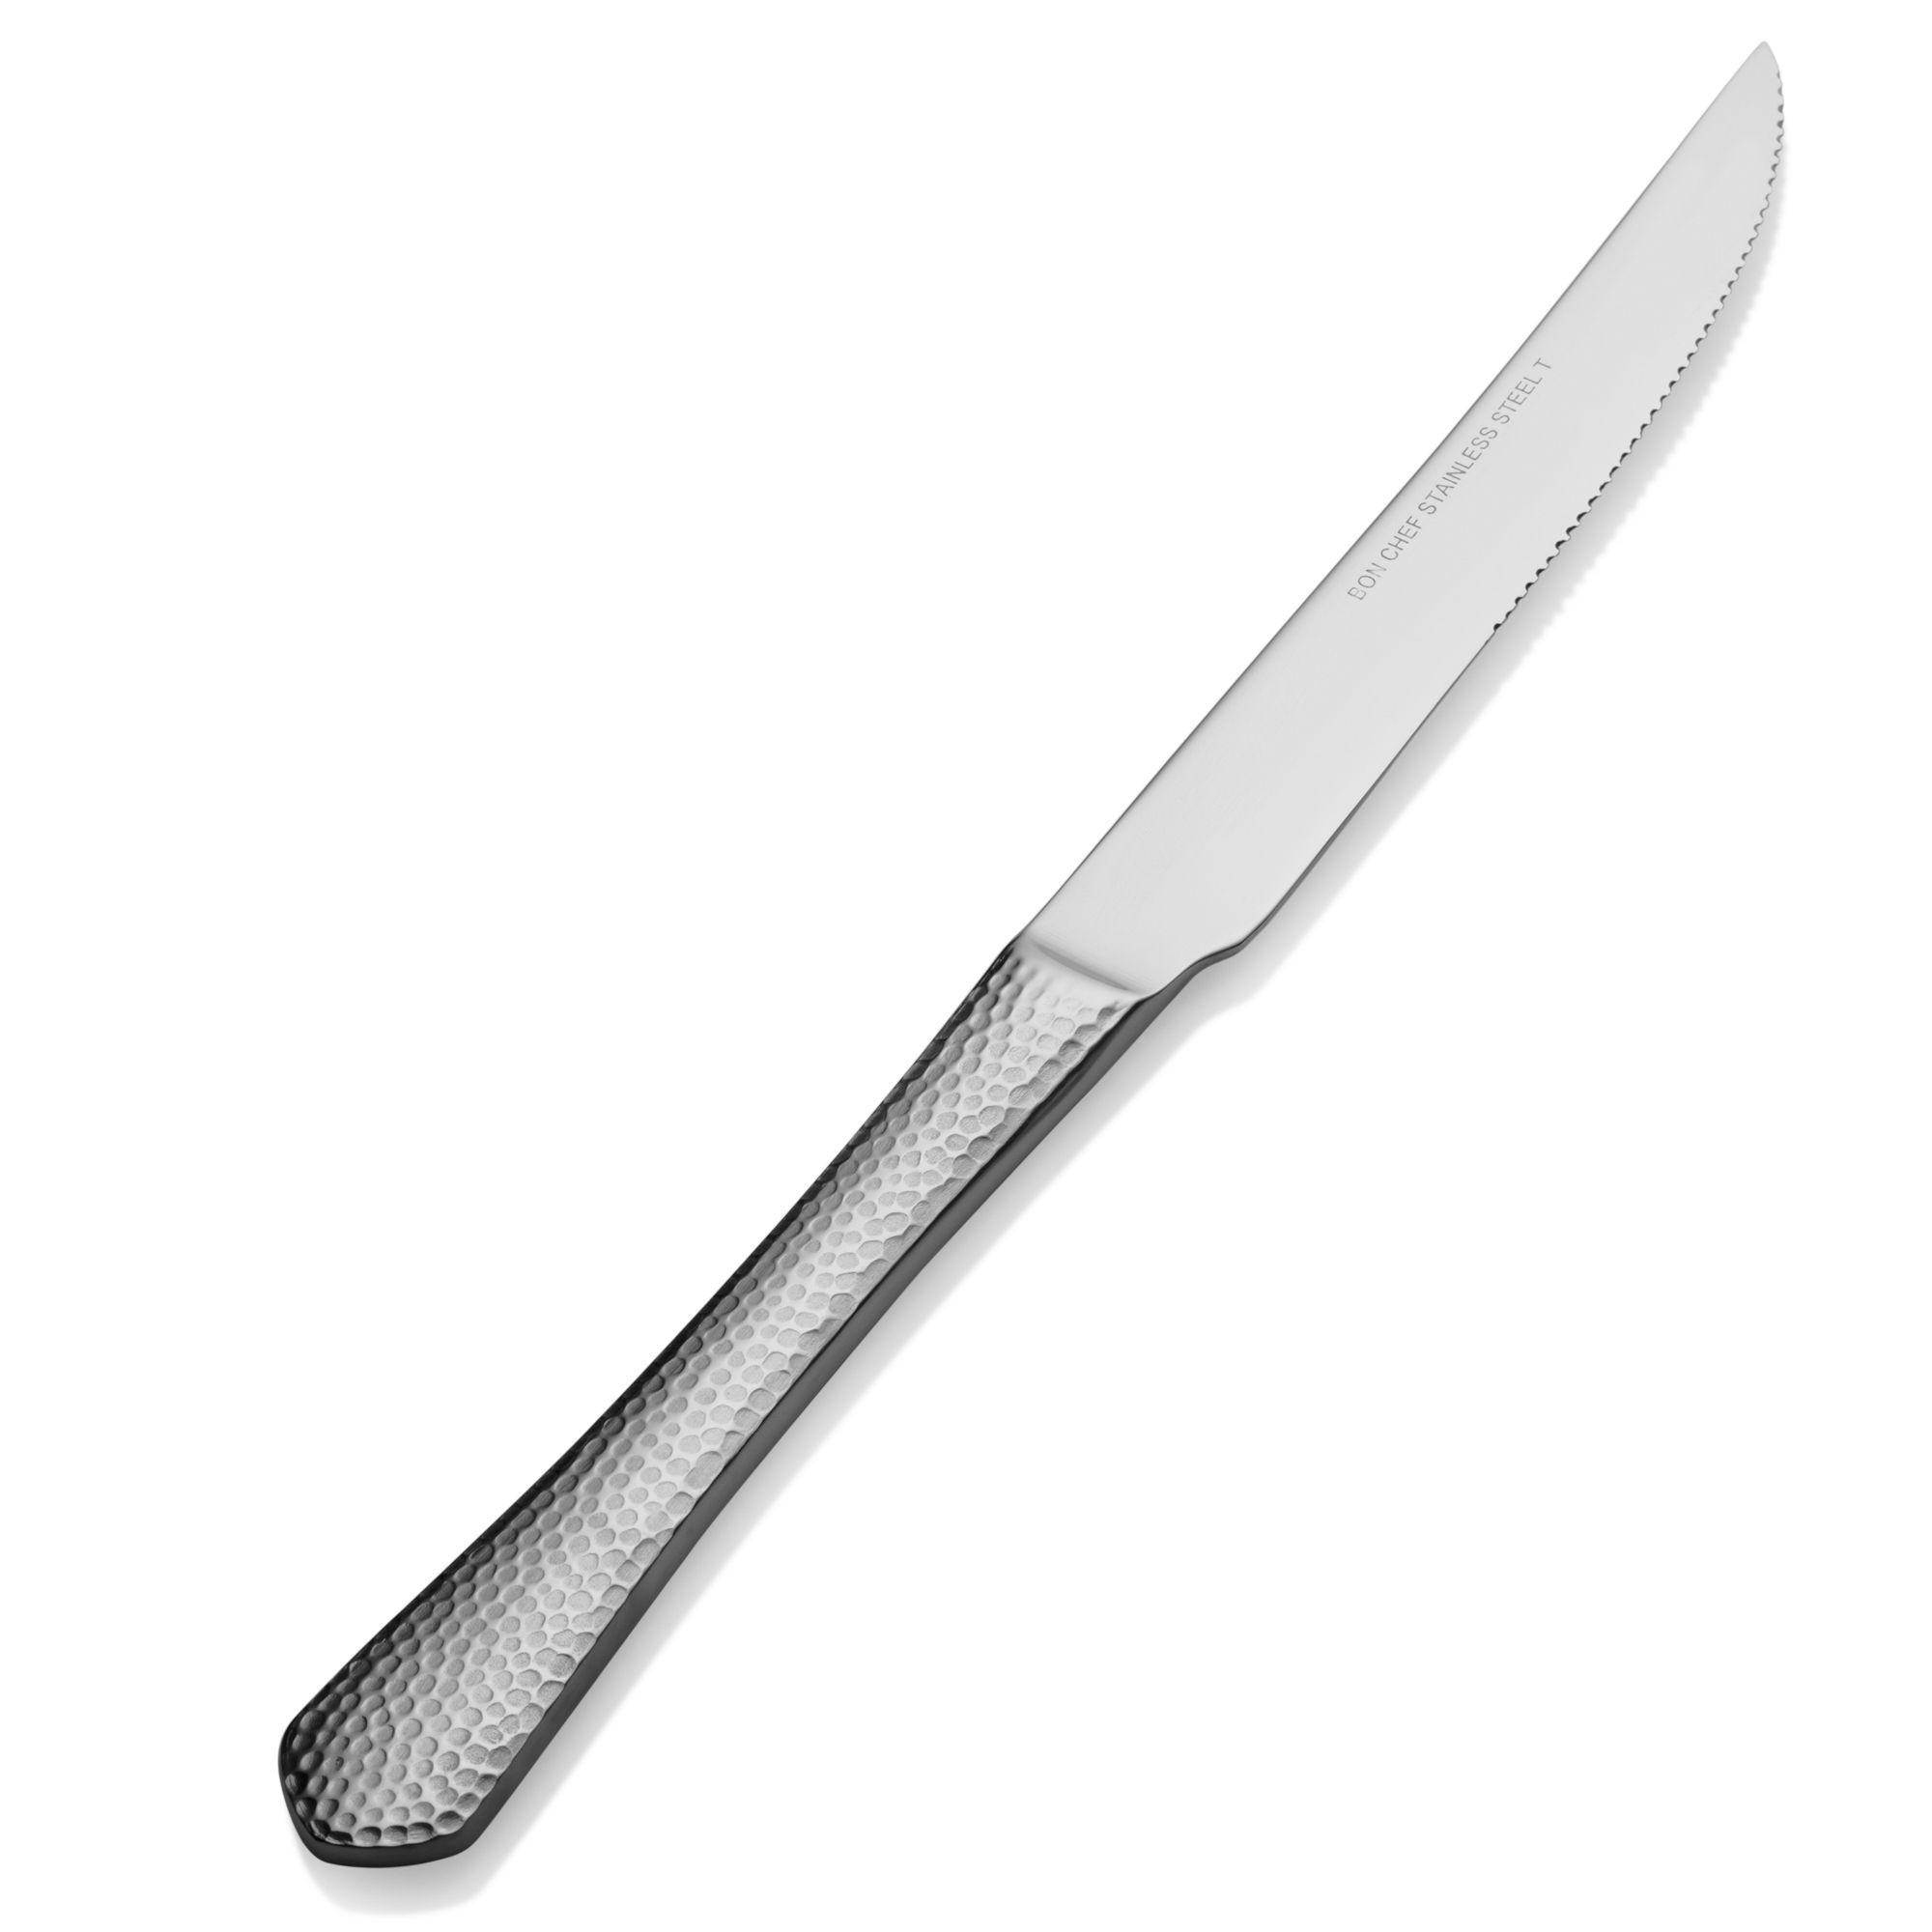 Bon Chef S1215S Reflections 18/8 Stainless Steel Silverplated European Solid Handle Steak Knife